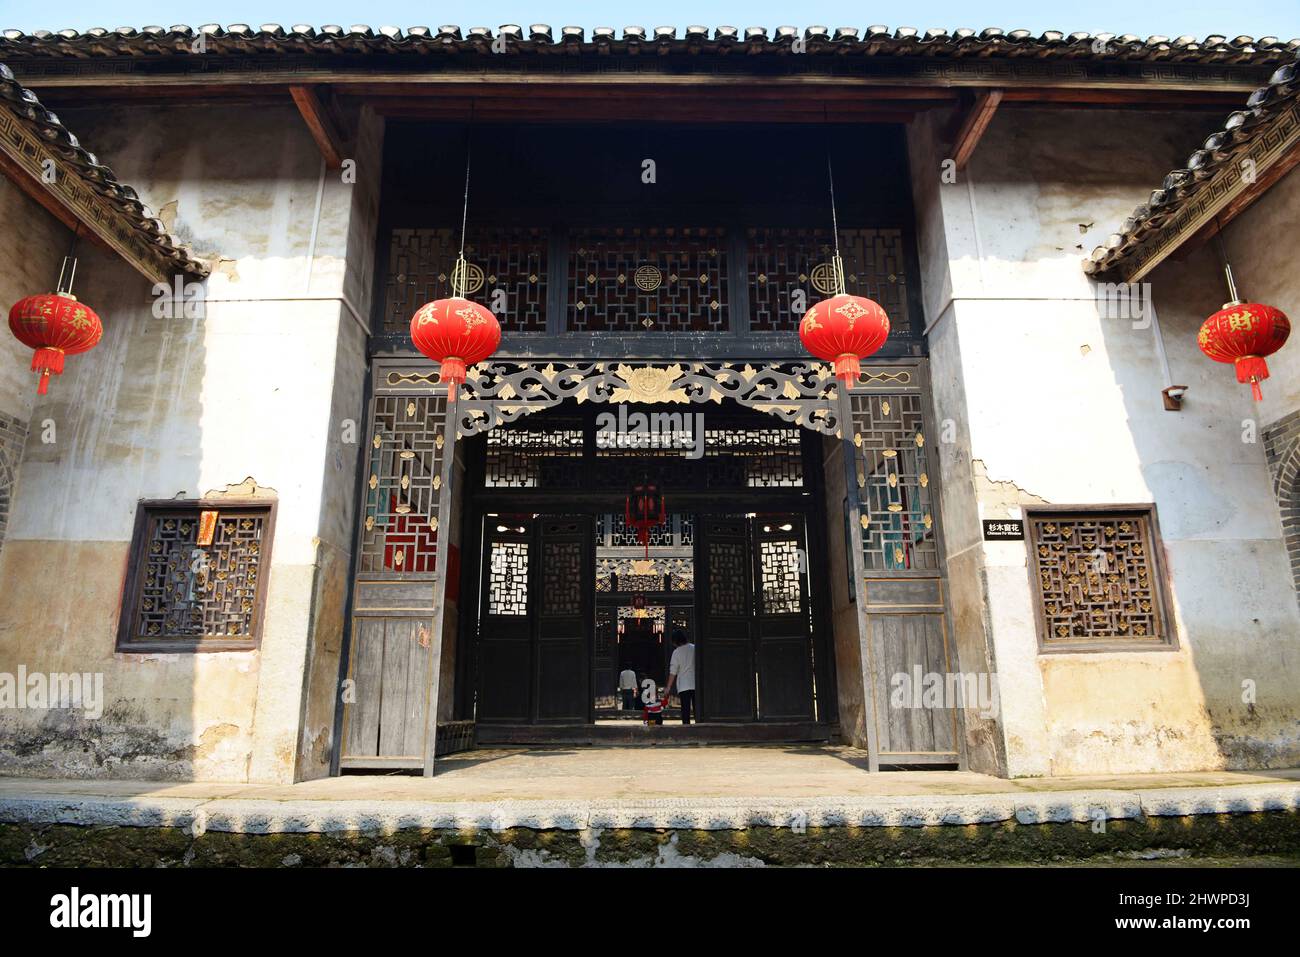 Hezhou, Hezhou, China. 7th Mar, 2022. On March 5, tourists visit a Hakka Round Housein Rinchong Village, Liantang Town, Babu District, Hezhou City.Jiang's ancestral house, located in Rinchong Village, Liantang Town, Babu District, Hezhou City, Guangxi Province, was built in the Qing Dynasty and has a history of more than 200 years. It is a typical Hakka Round House in East Guizhou. The Round House covers an area of more than 30 acres. The building is a square symmetrical structure, surrounded by a 3-meter-high wall and separated from the outside world. The layout of the buildings, halls, and Stock Photo